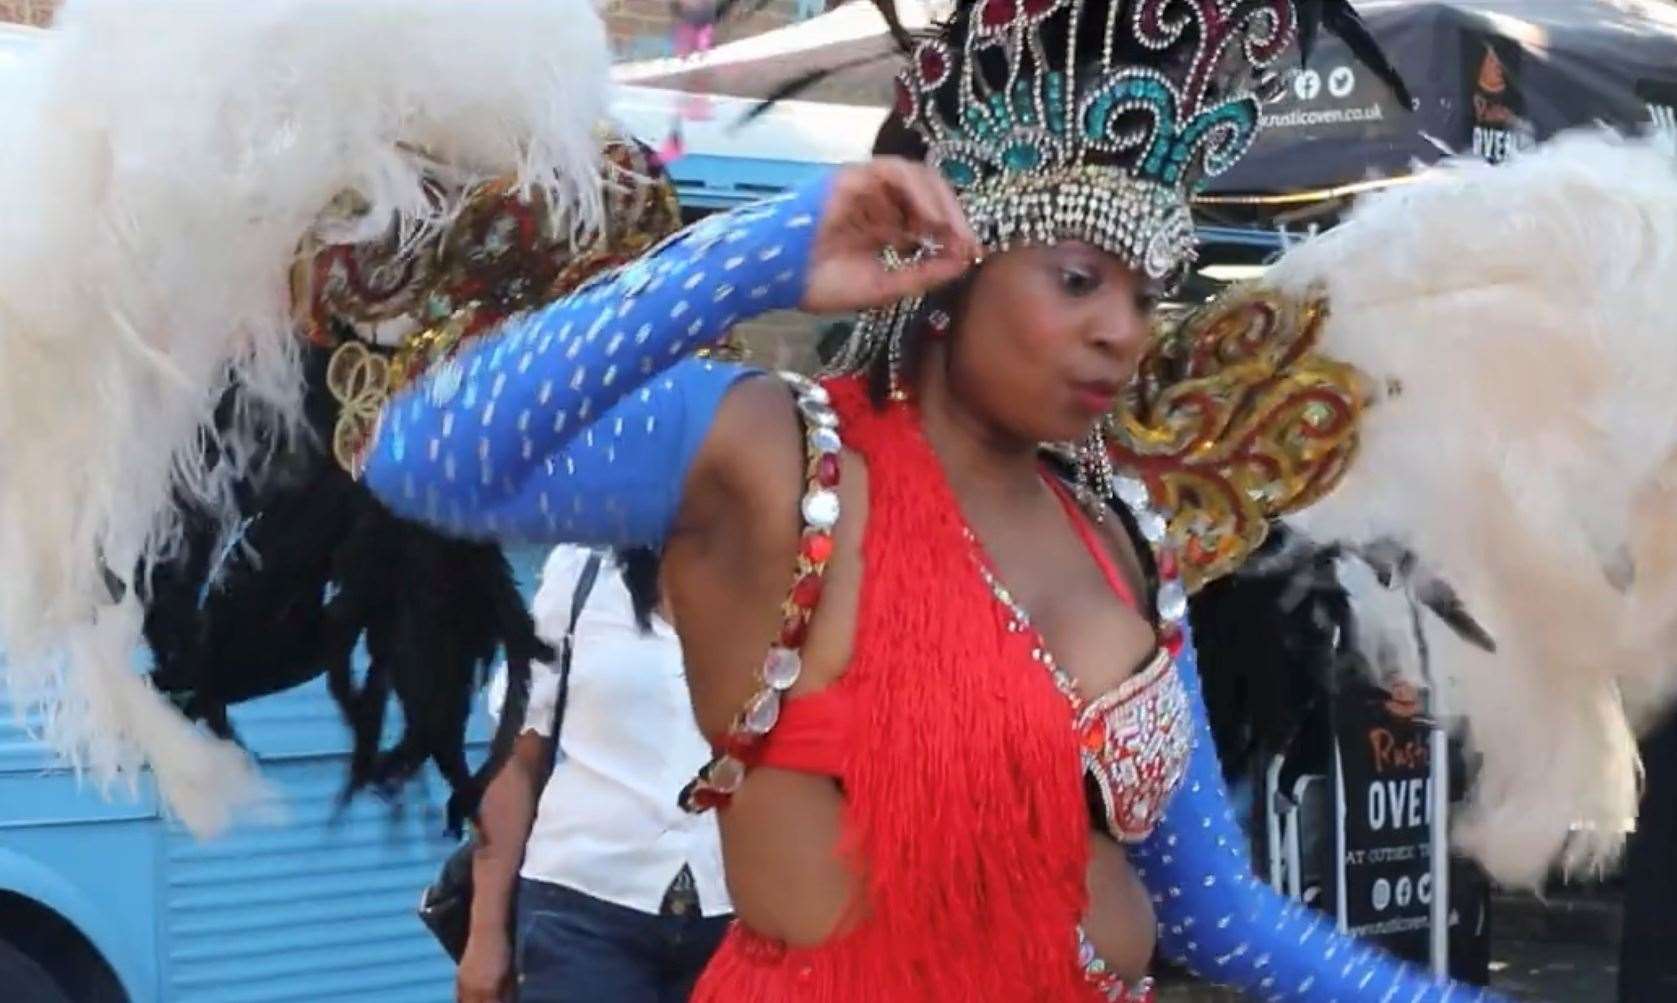 The event will immerse people in the traditions of the Notting Hill Carnival